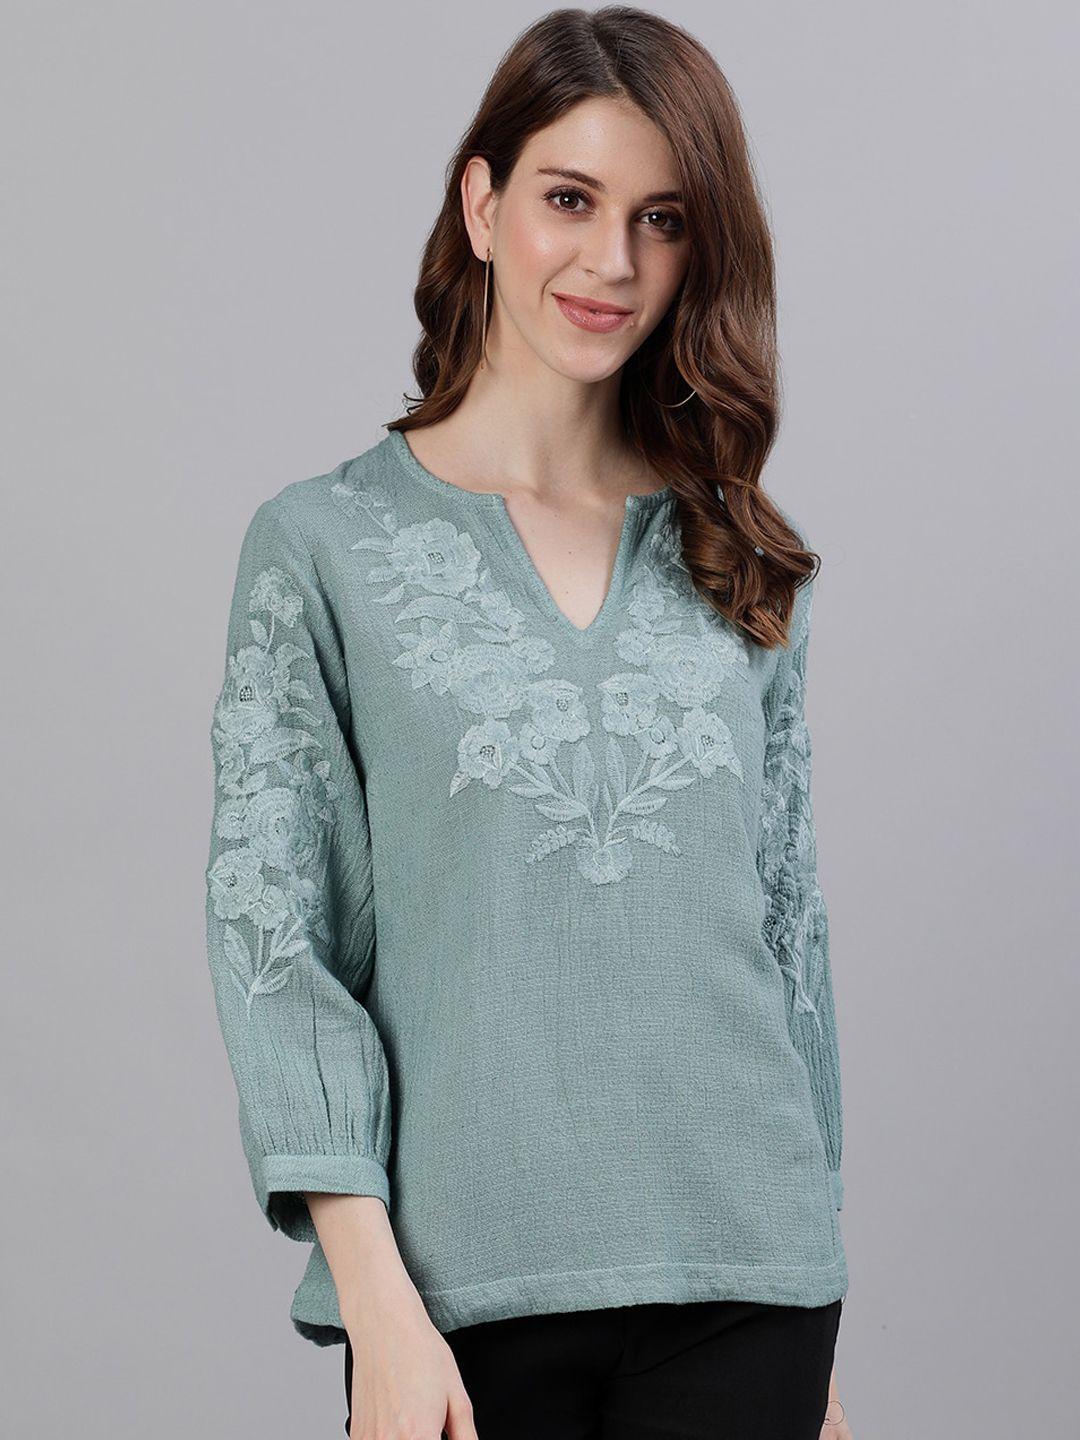 ishin sea green floral embroidered top